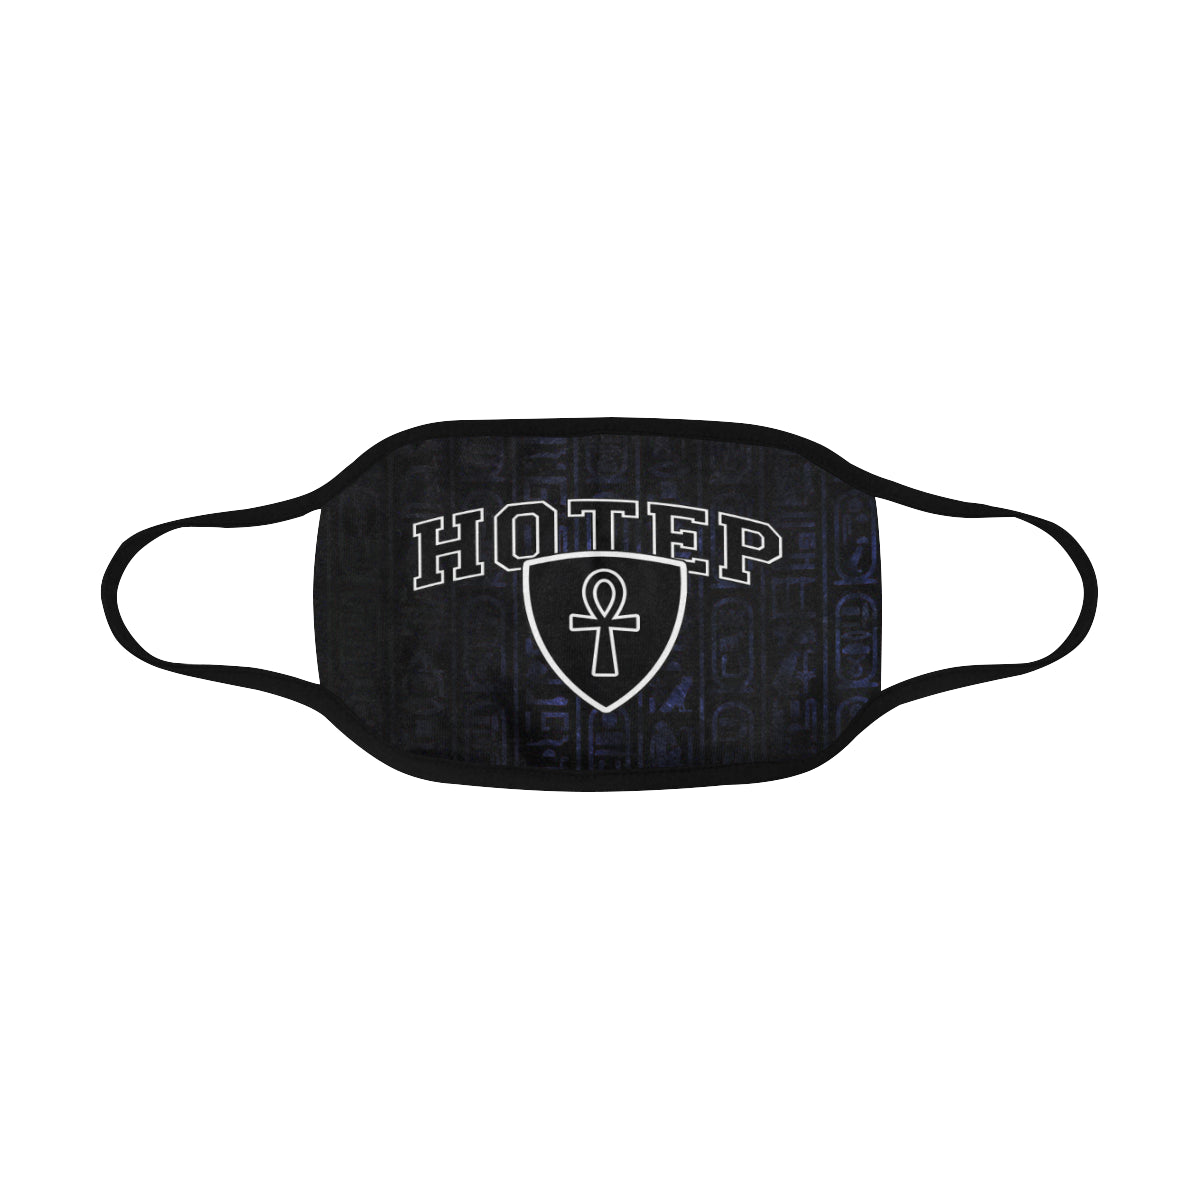 HOTEP ANKH Mouth Mask in One Piece (2 Filters Included)